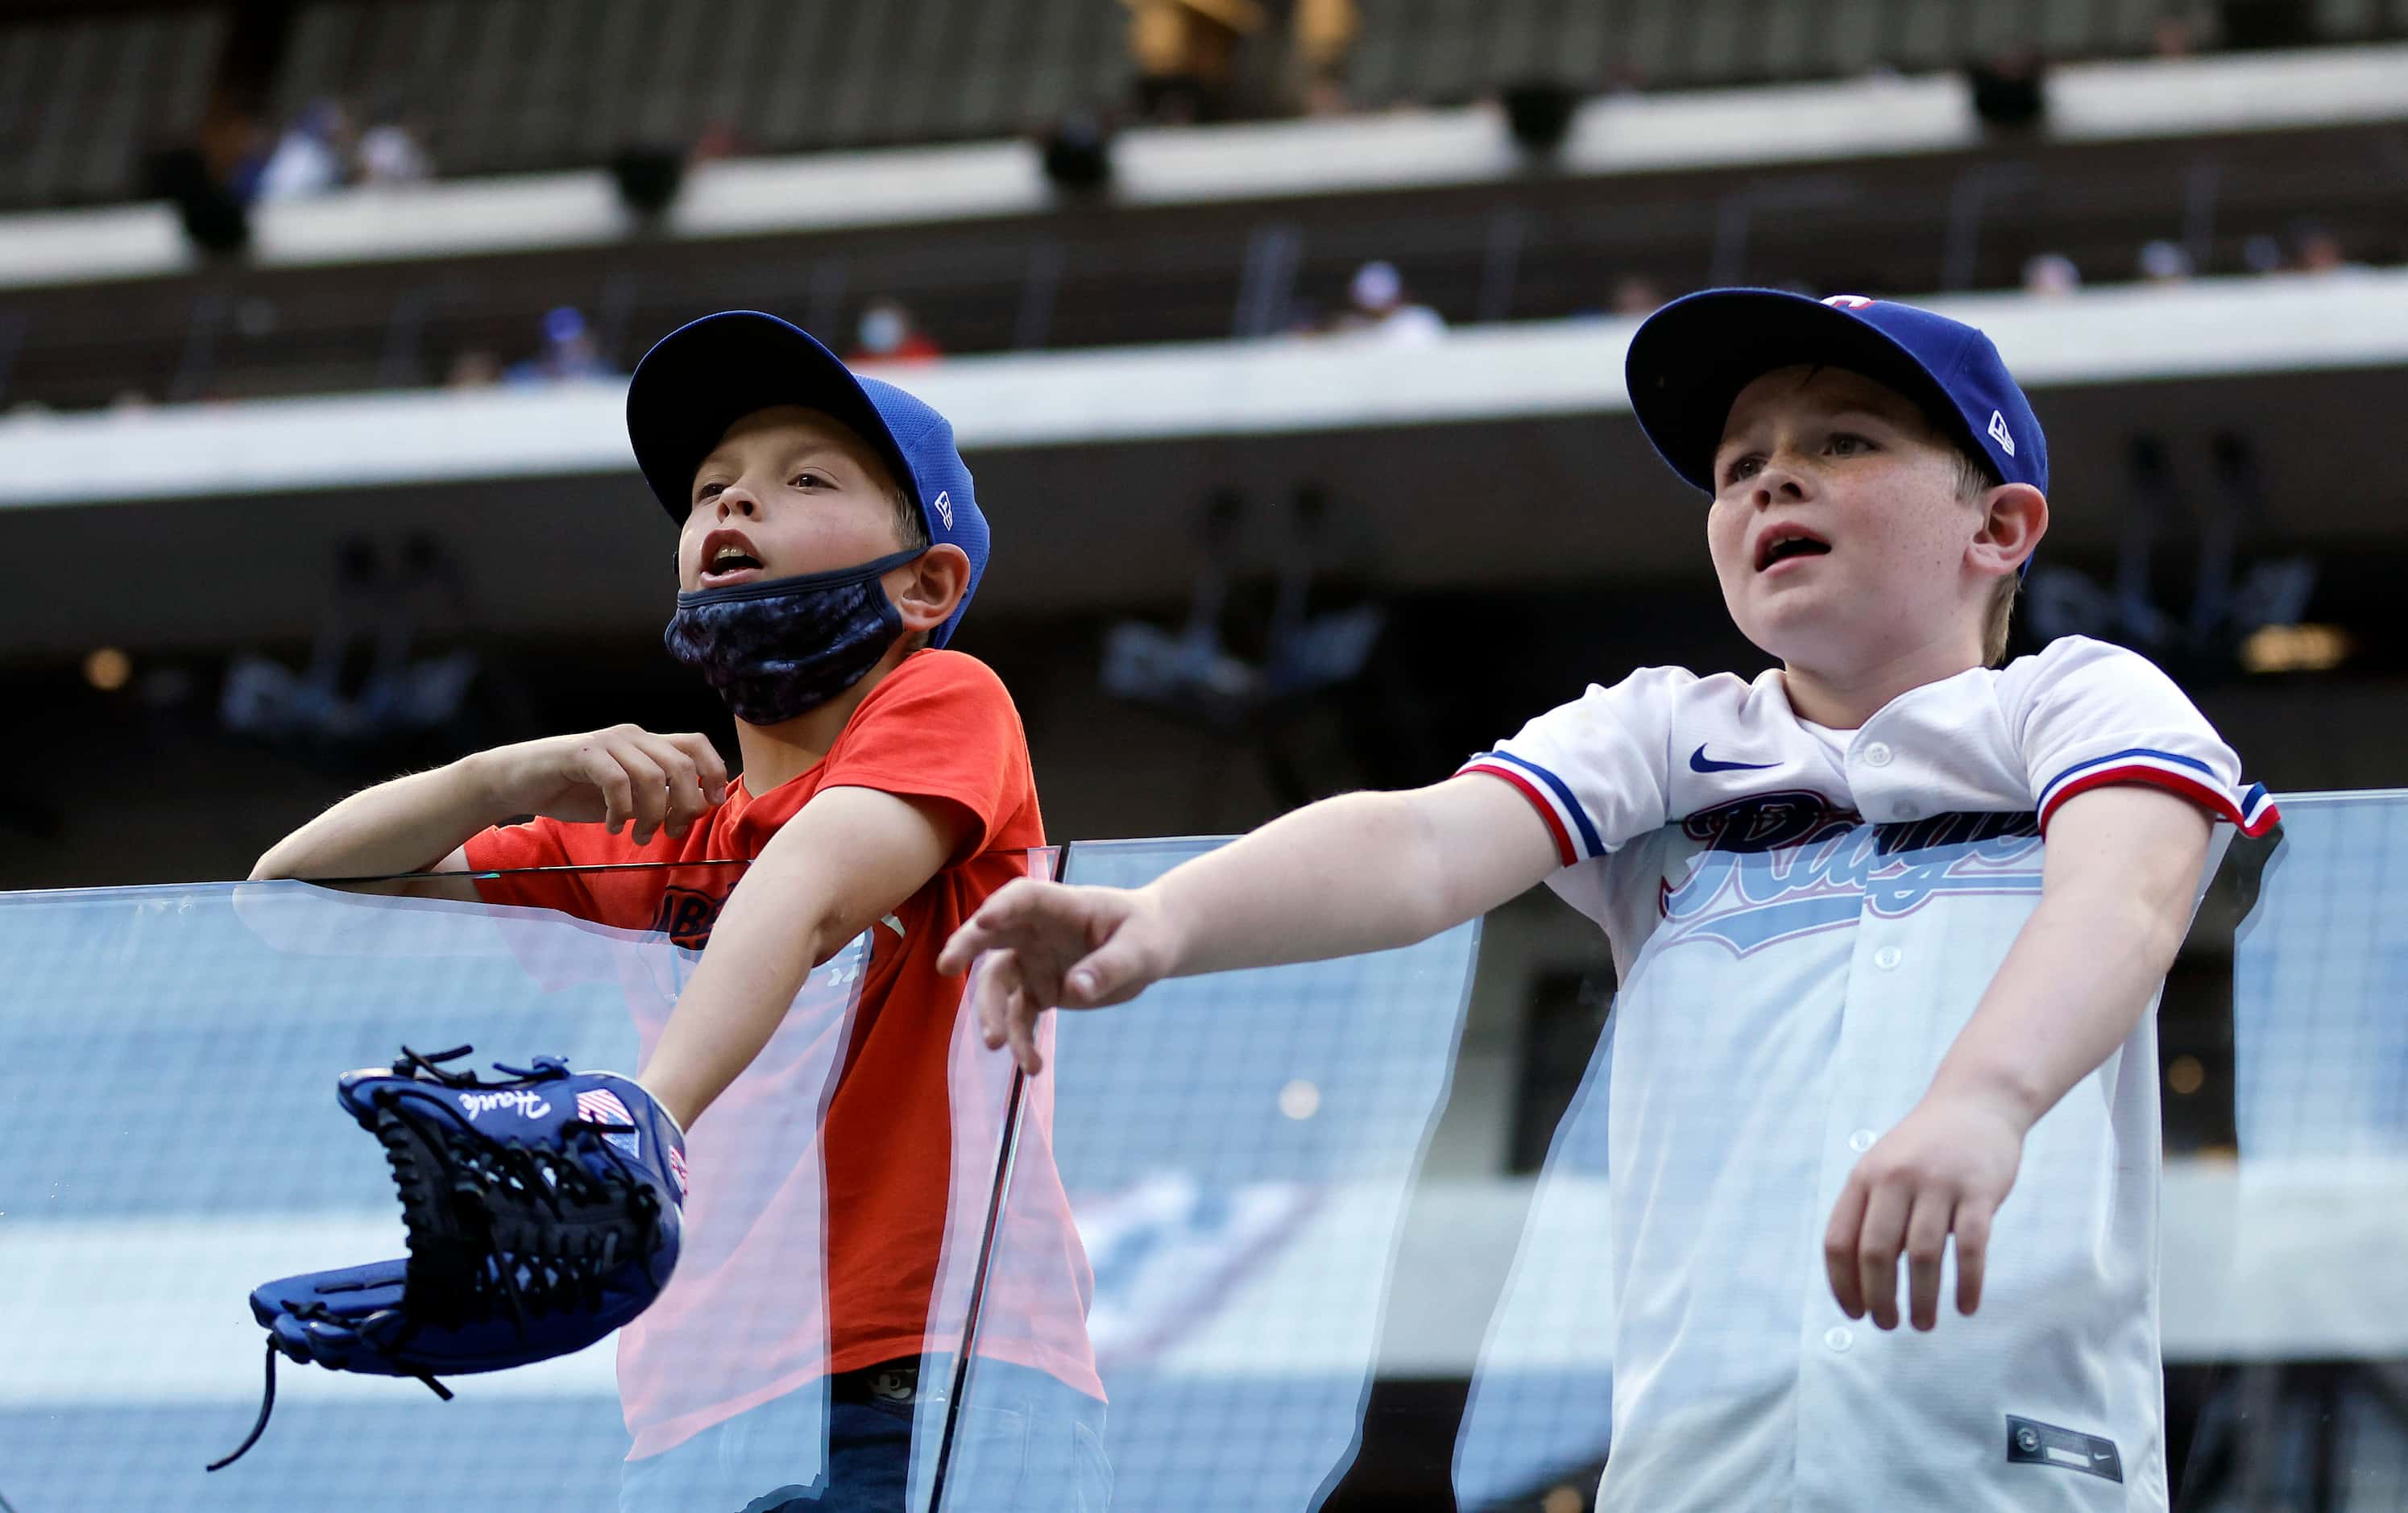 A pair of young Texas Rangers plead for a ball from a Toronto Blue Jays player coming off...